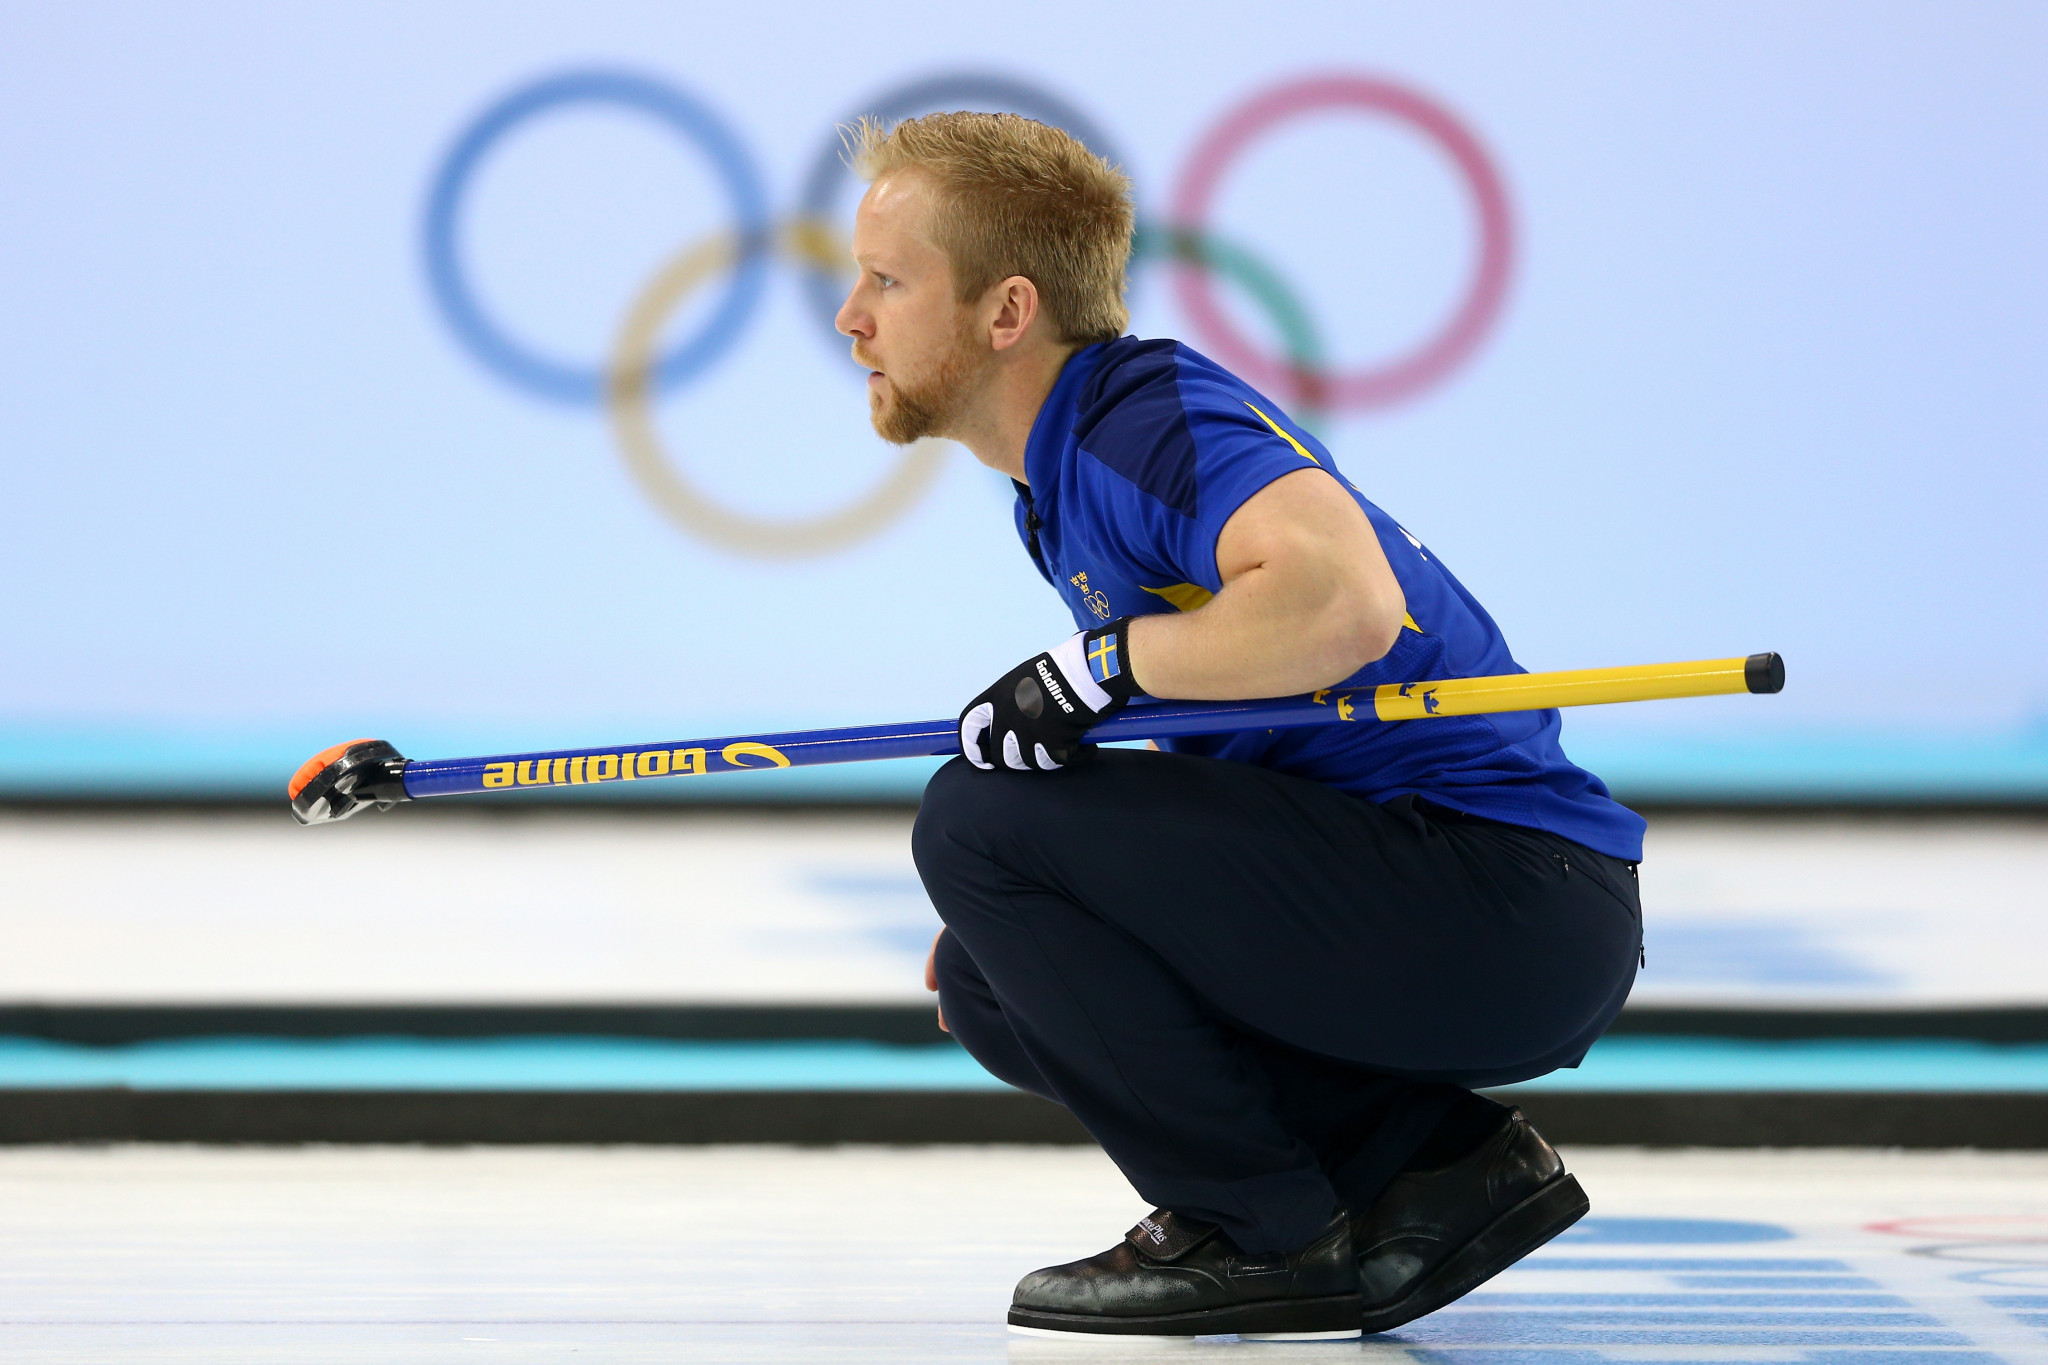 Sweden, Switzerland and Scotland remain undefeated at the European Curling Championships